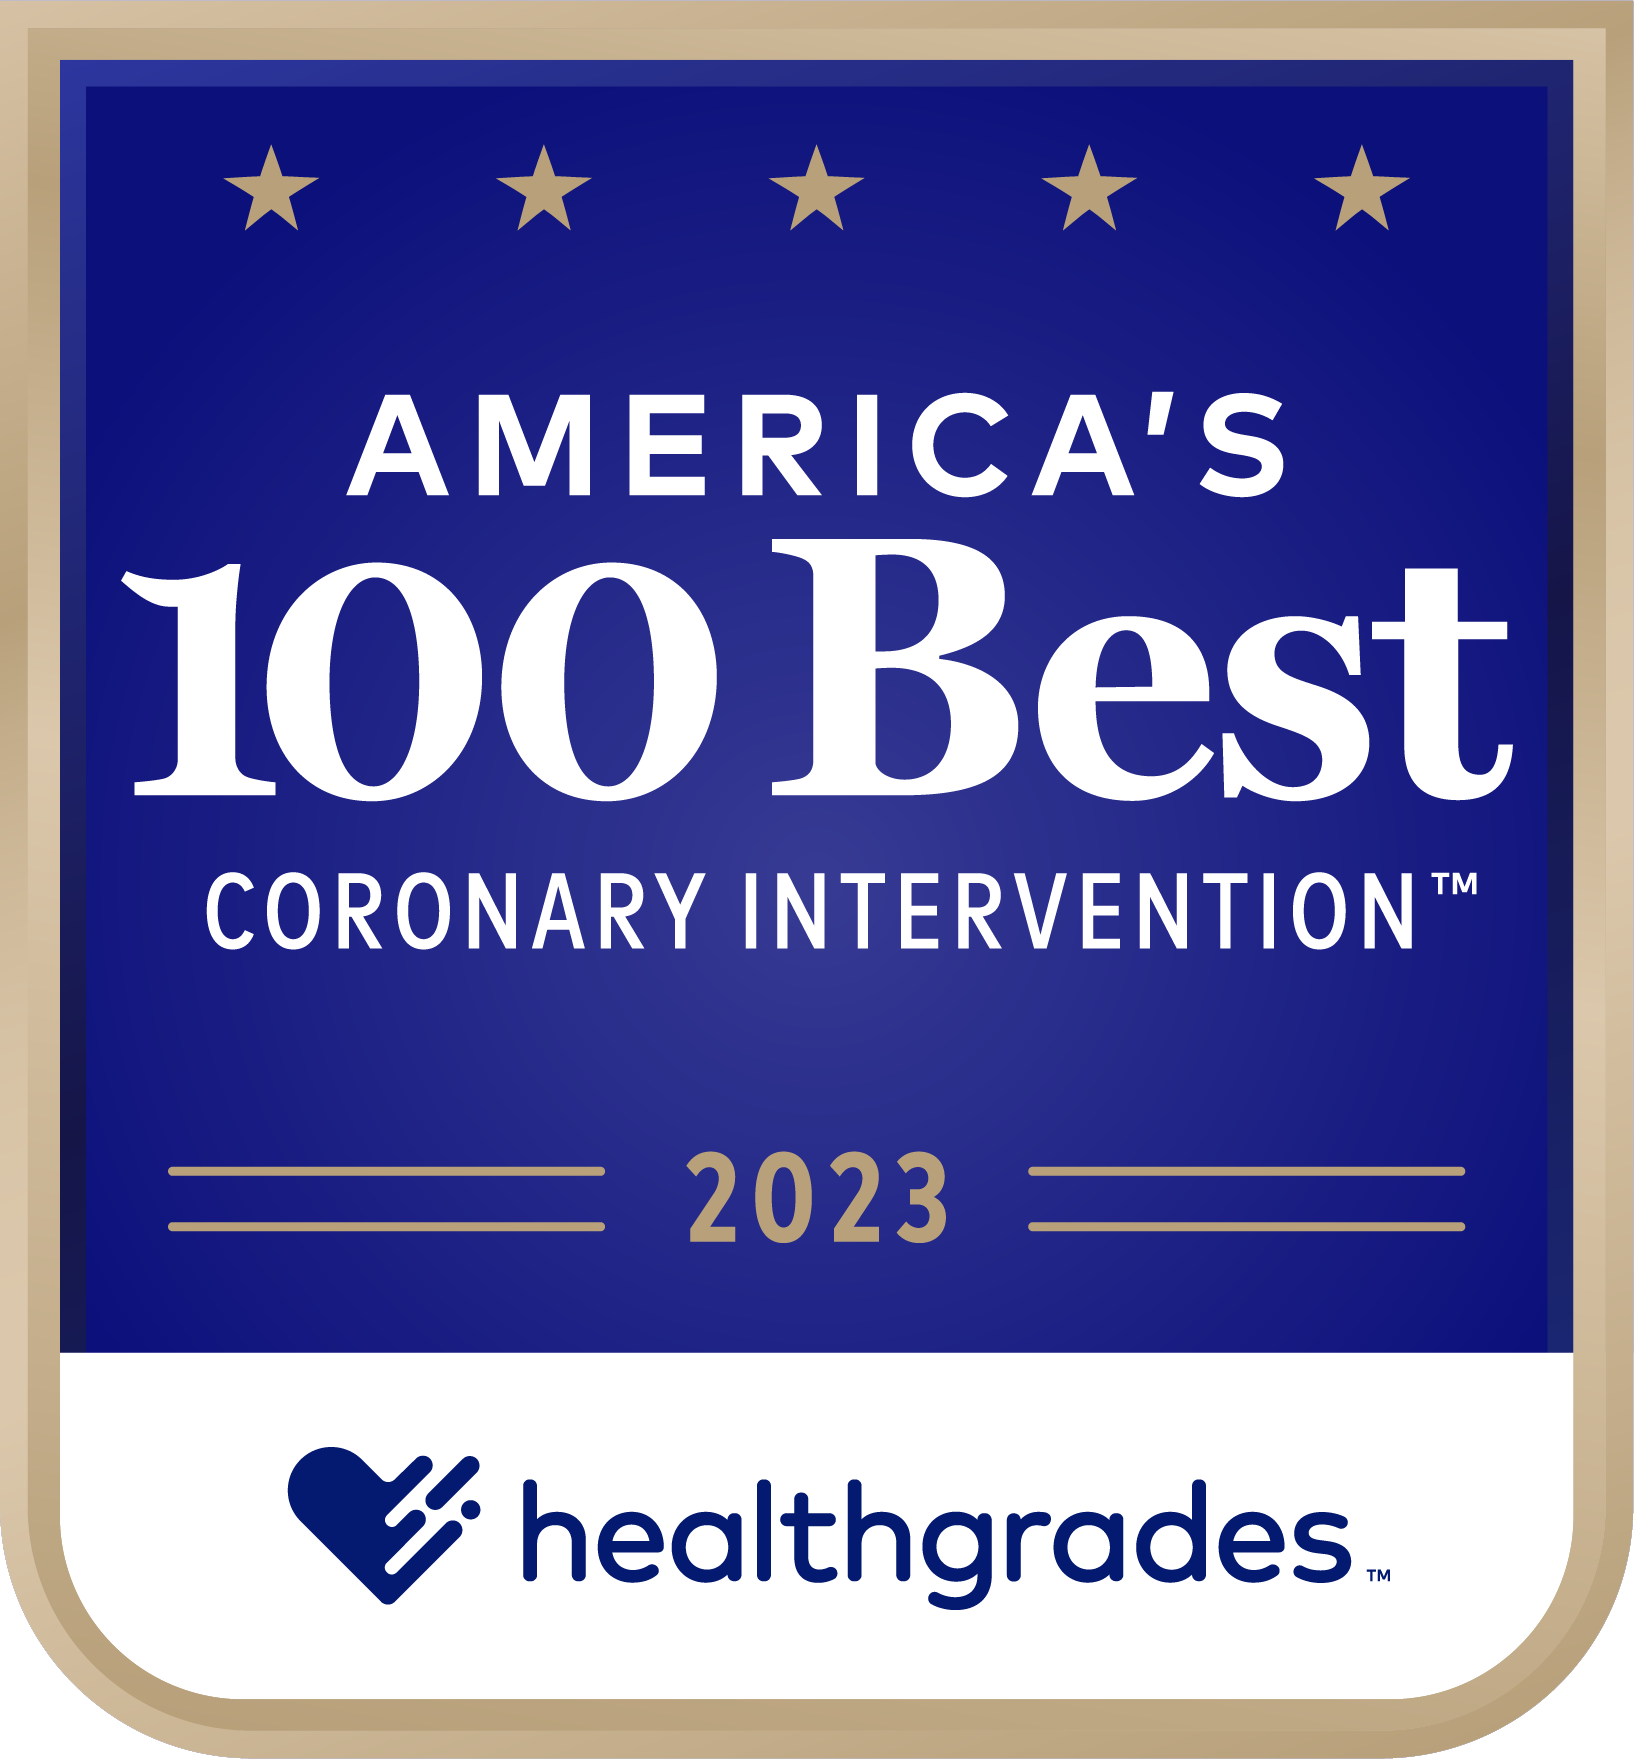 Recipient of the Healthgrades Coronary Intervention Excellence Award™ for 2023